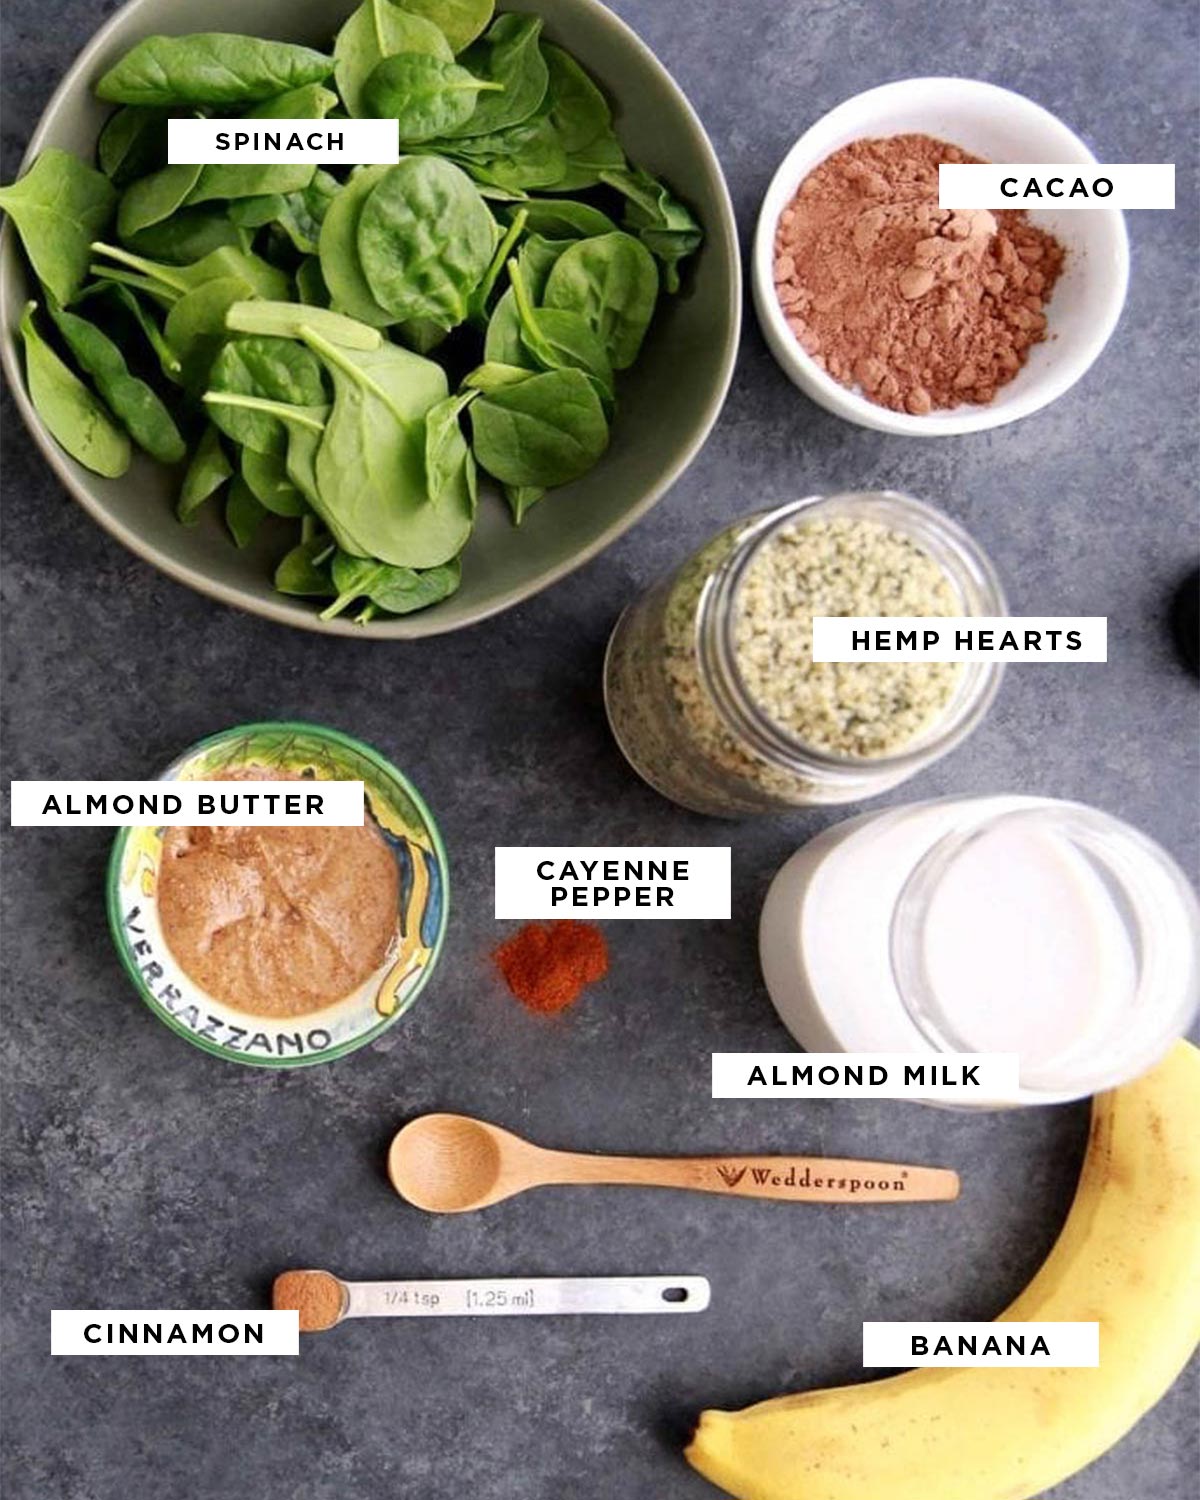 ingredients in black text surrounded by white boxes for a weight loss protein smoothie including spinach, cacao, hemp hearts, almond butter, cayenne pepper, almond milk, cinnamon and banana.